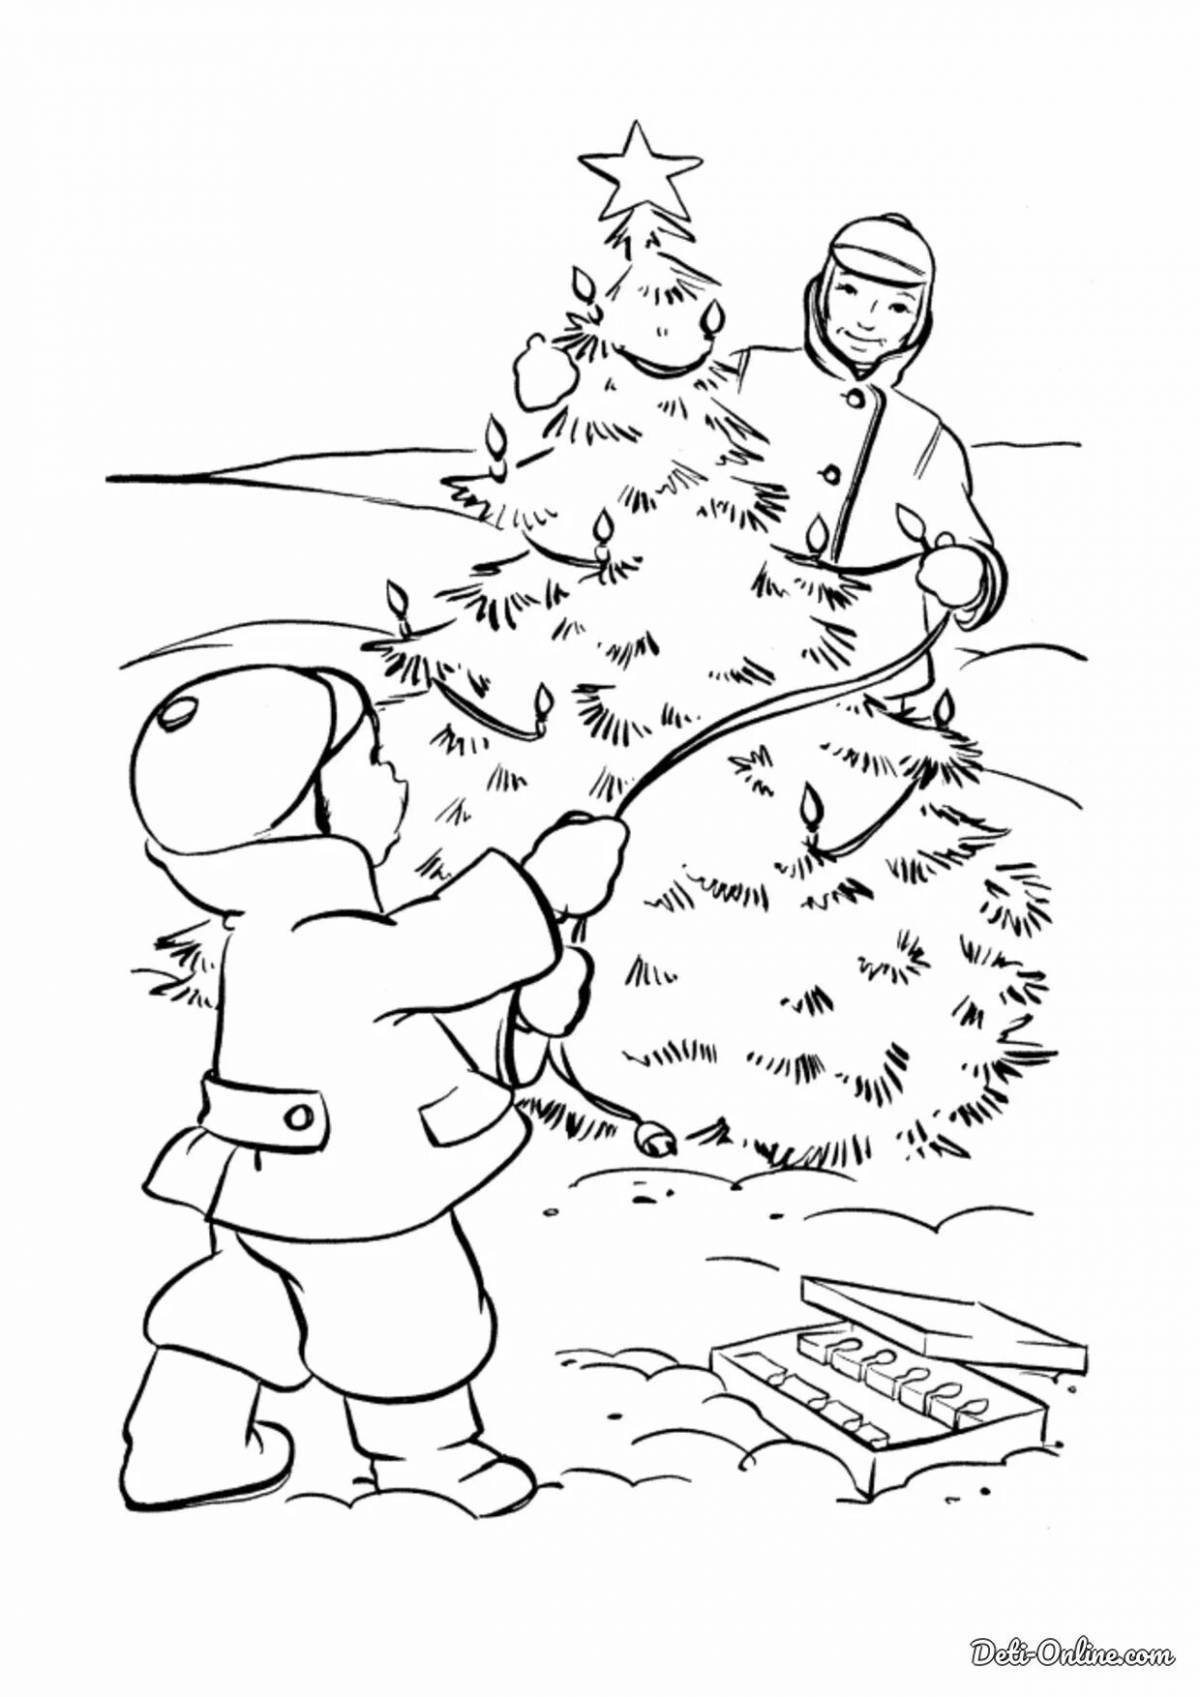 Furious christmas story coloring pages